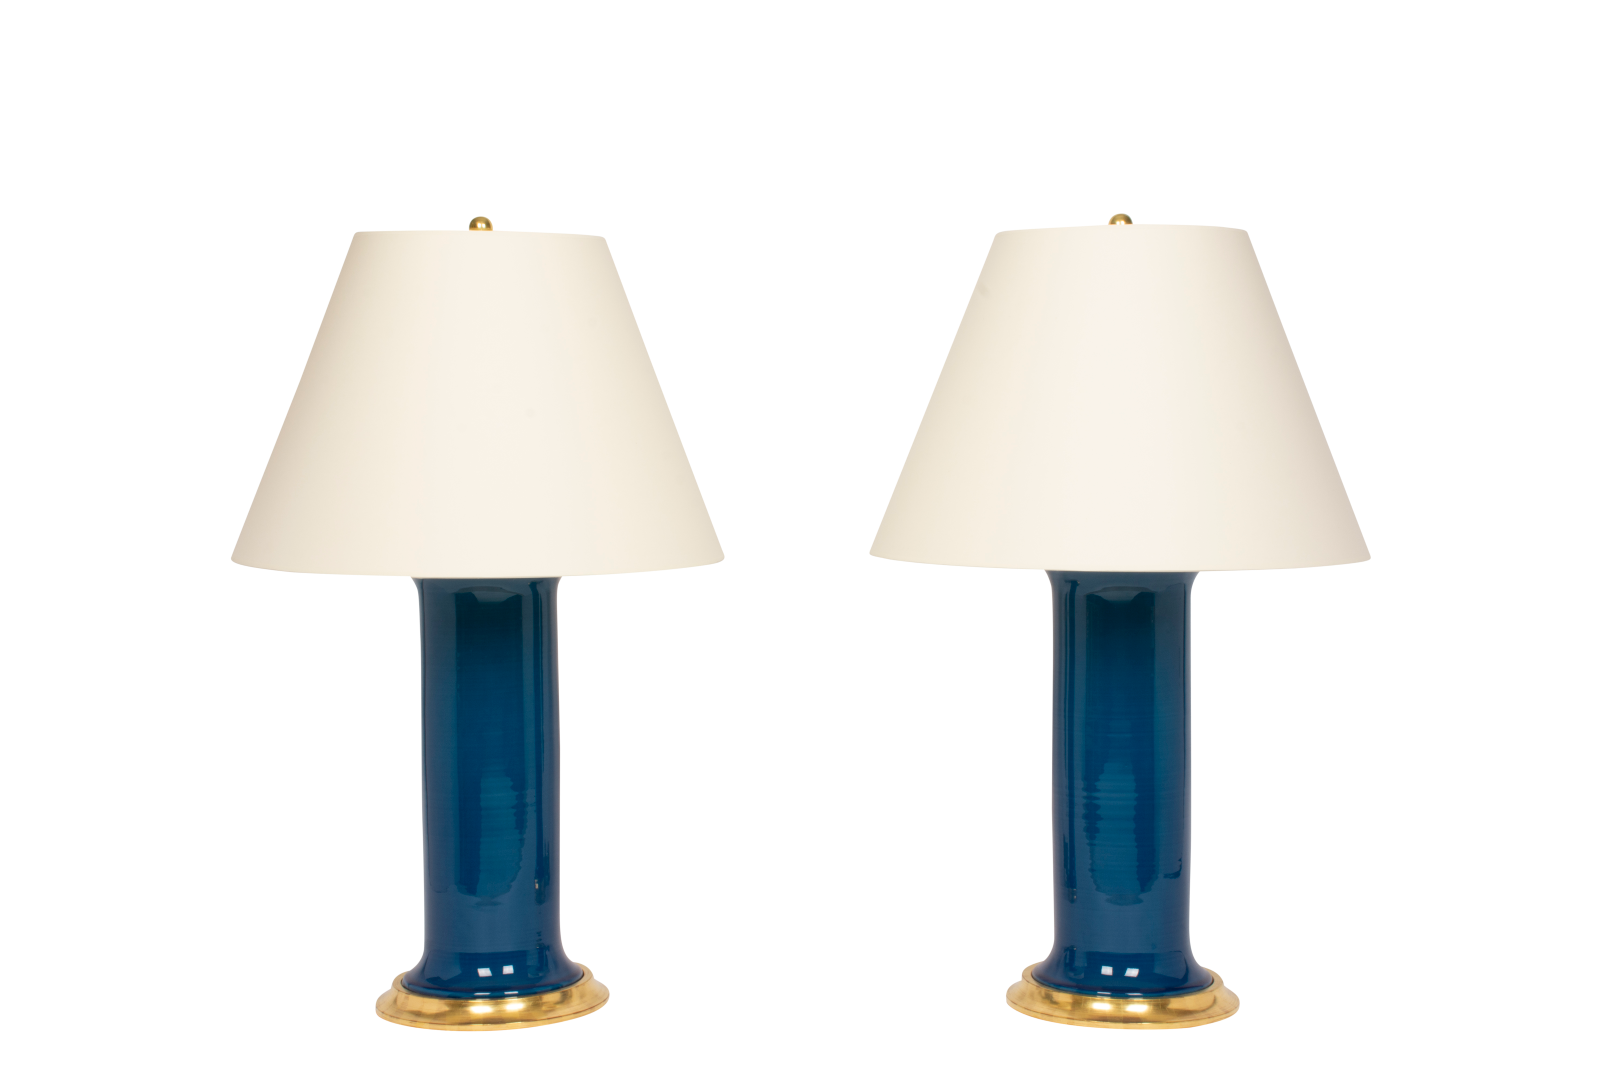 Patricia Large Lamp Pair in Prussian Blue